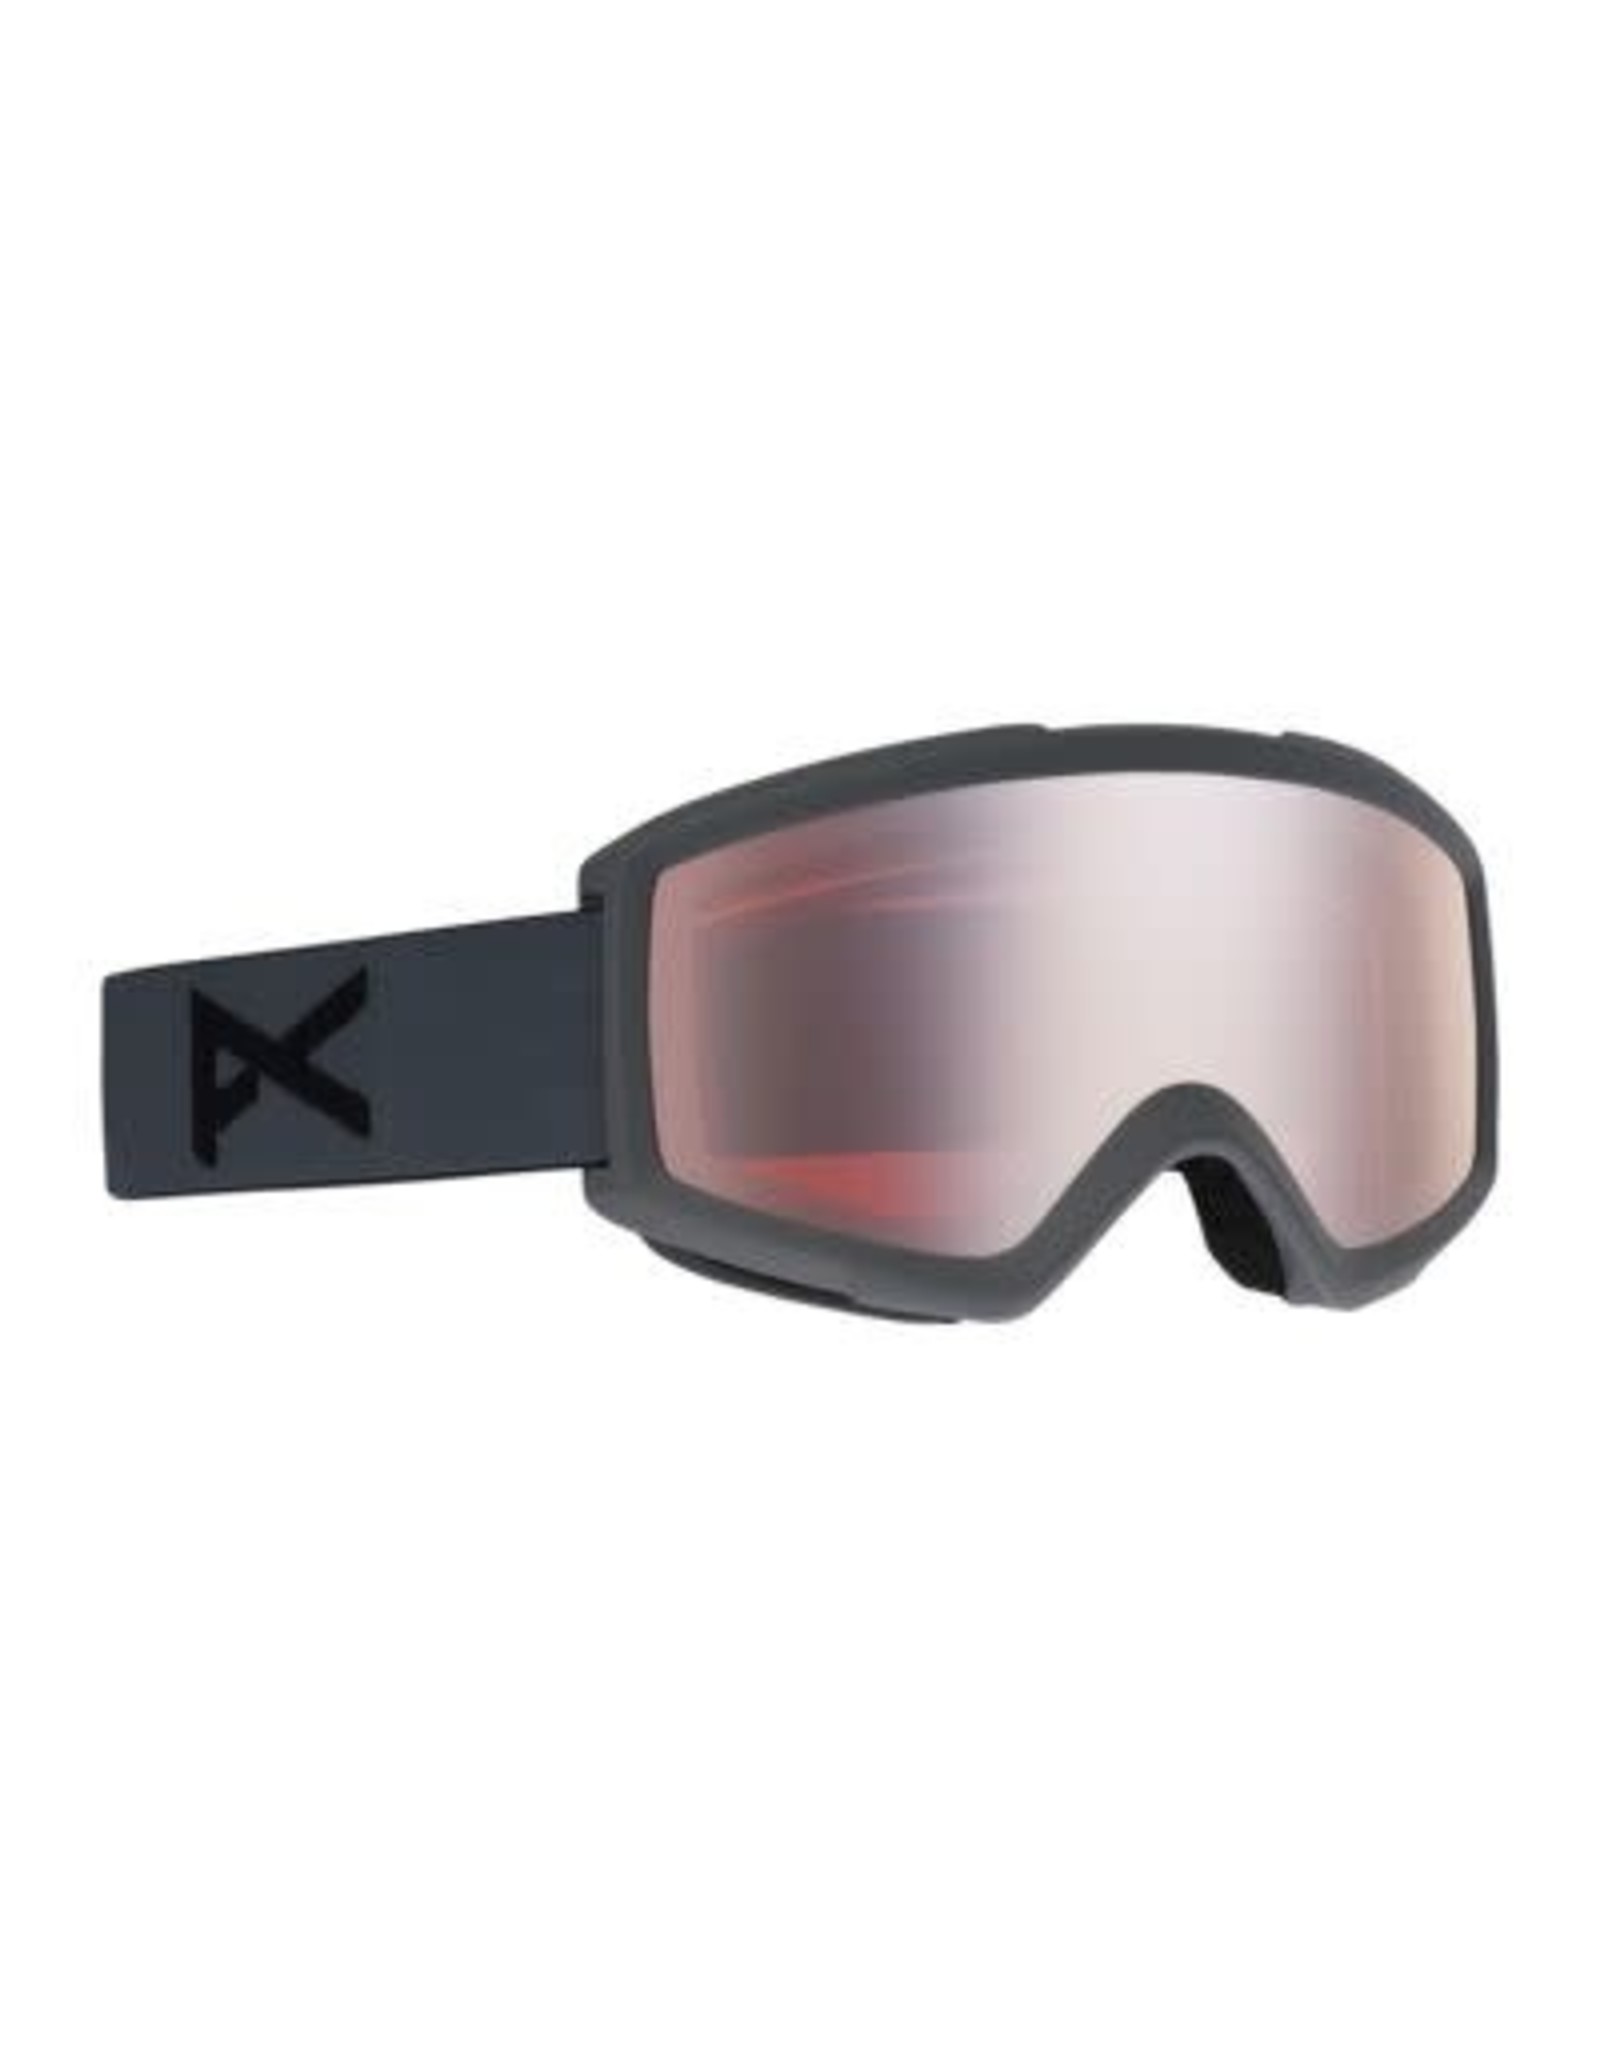 Anon Helix 2.0 Goggle W/Spare Lens Black/Silver Amber Lens 